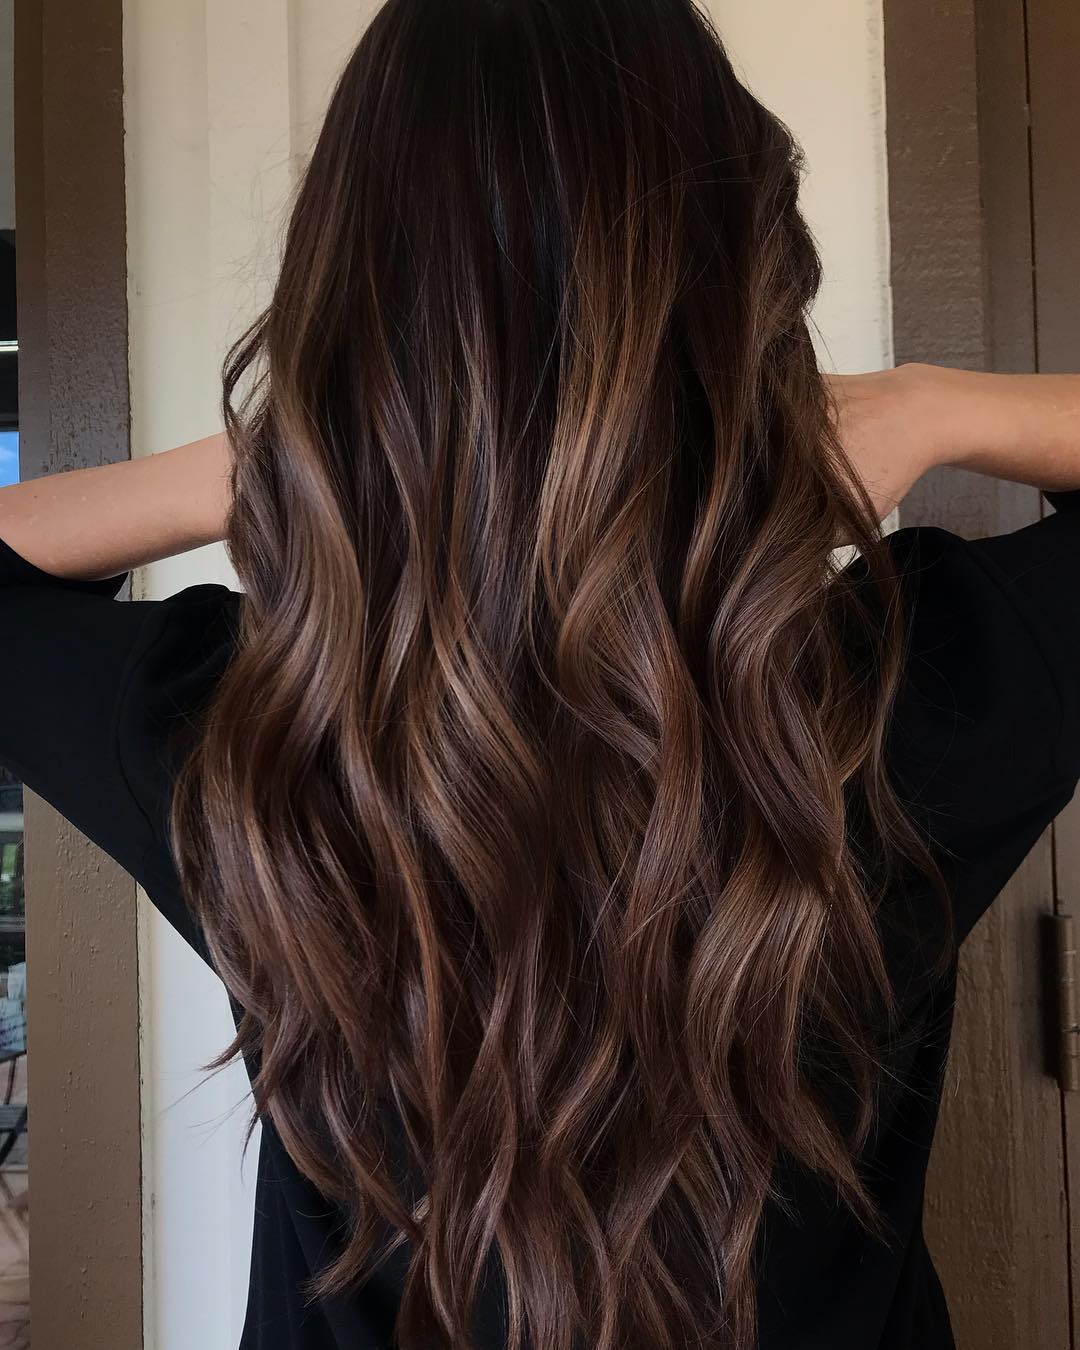 17 Rich Brown Hair Color Ideas - The Right Hairstyles